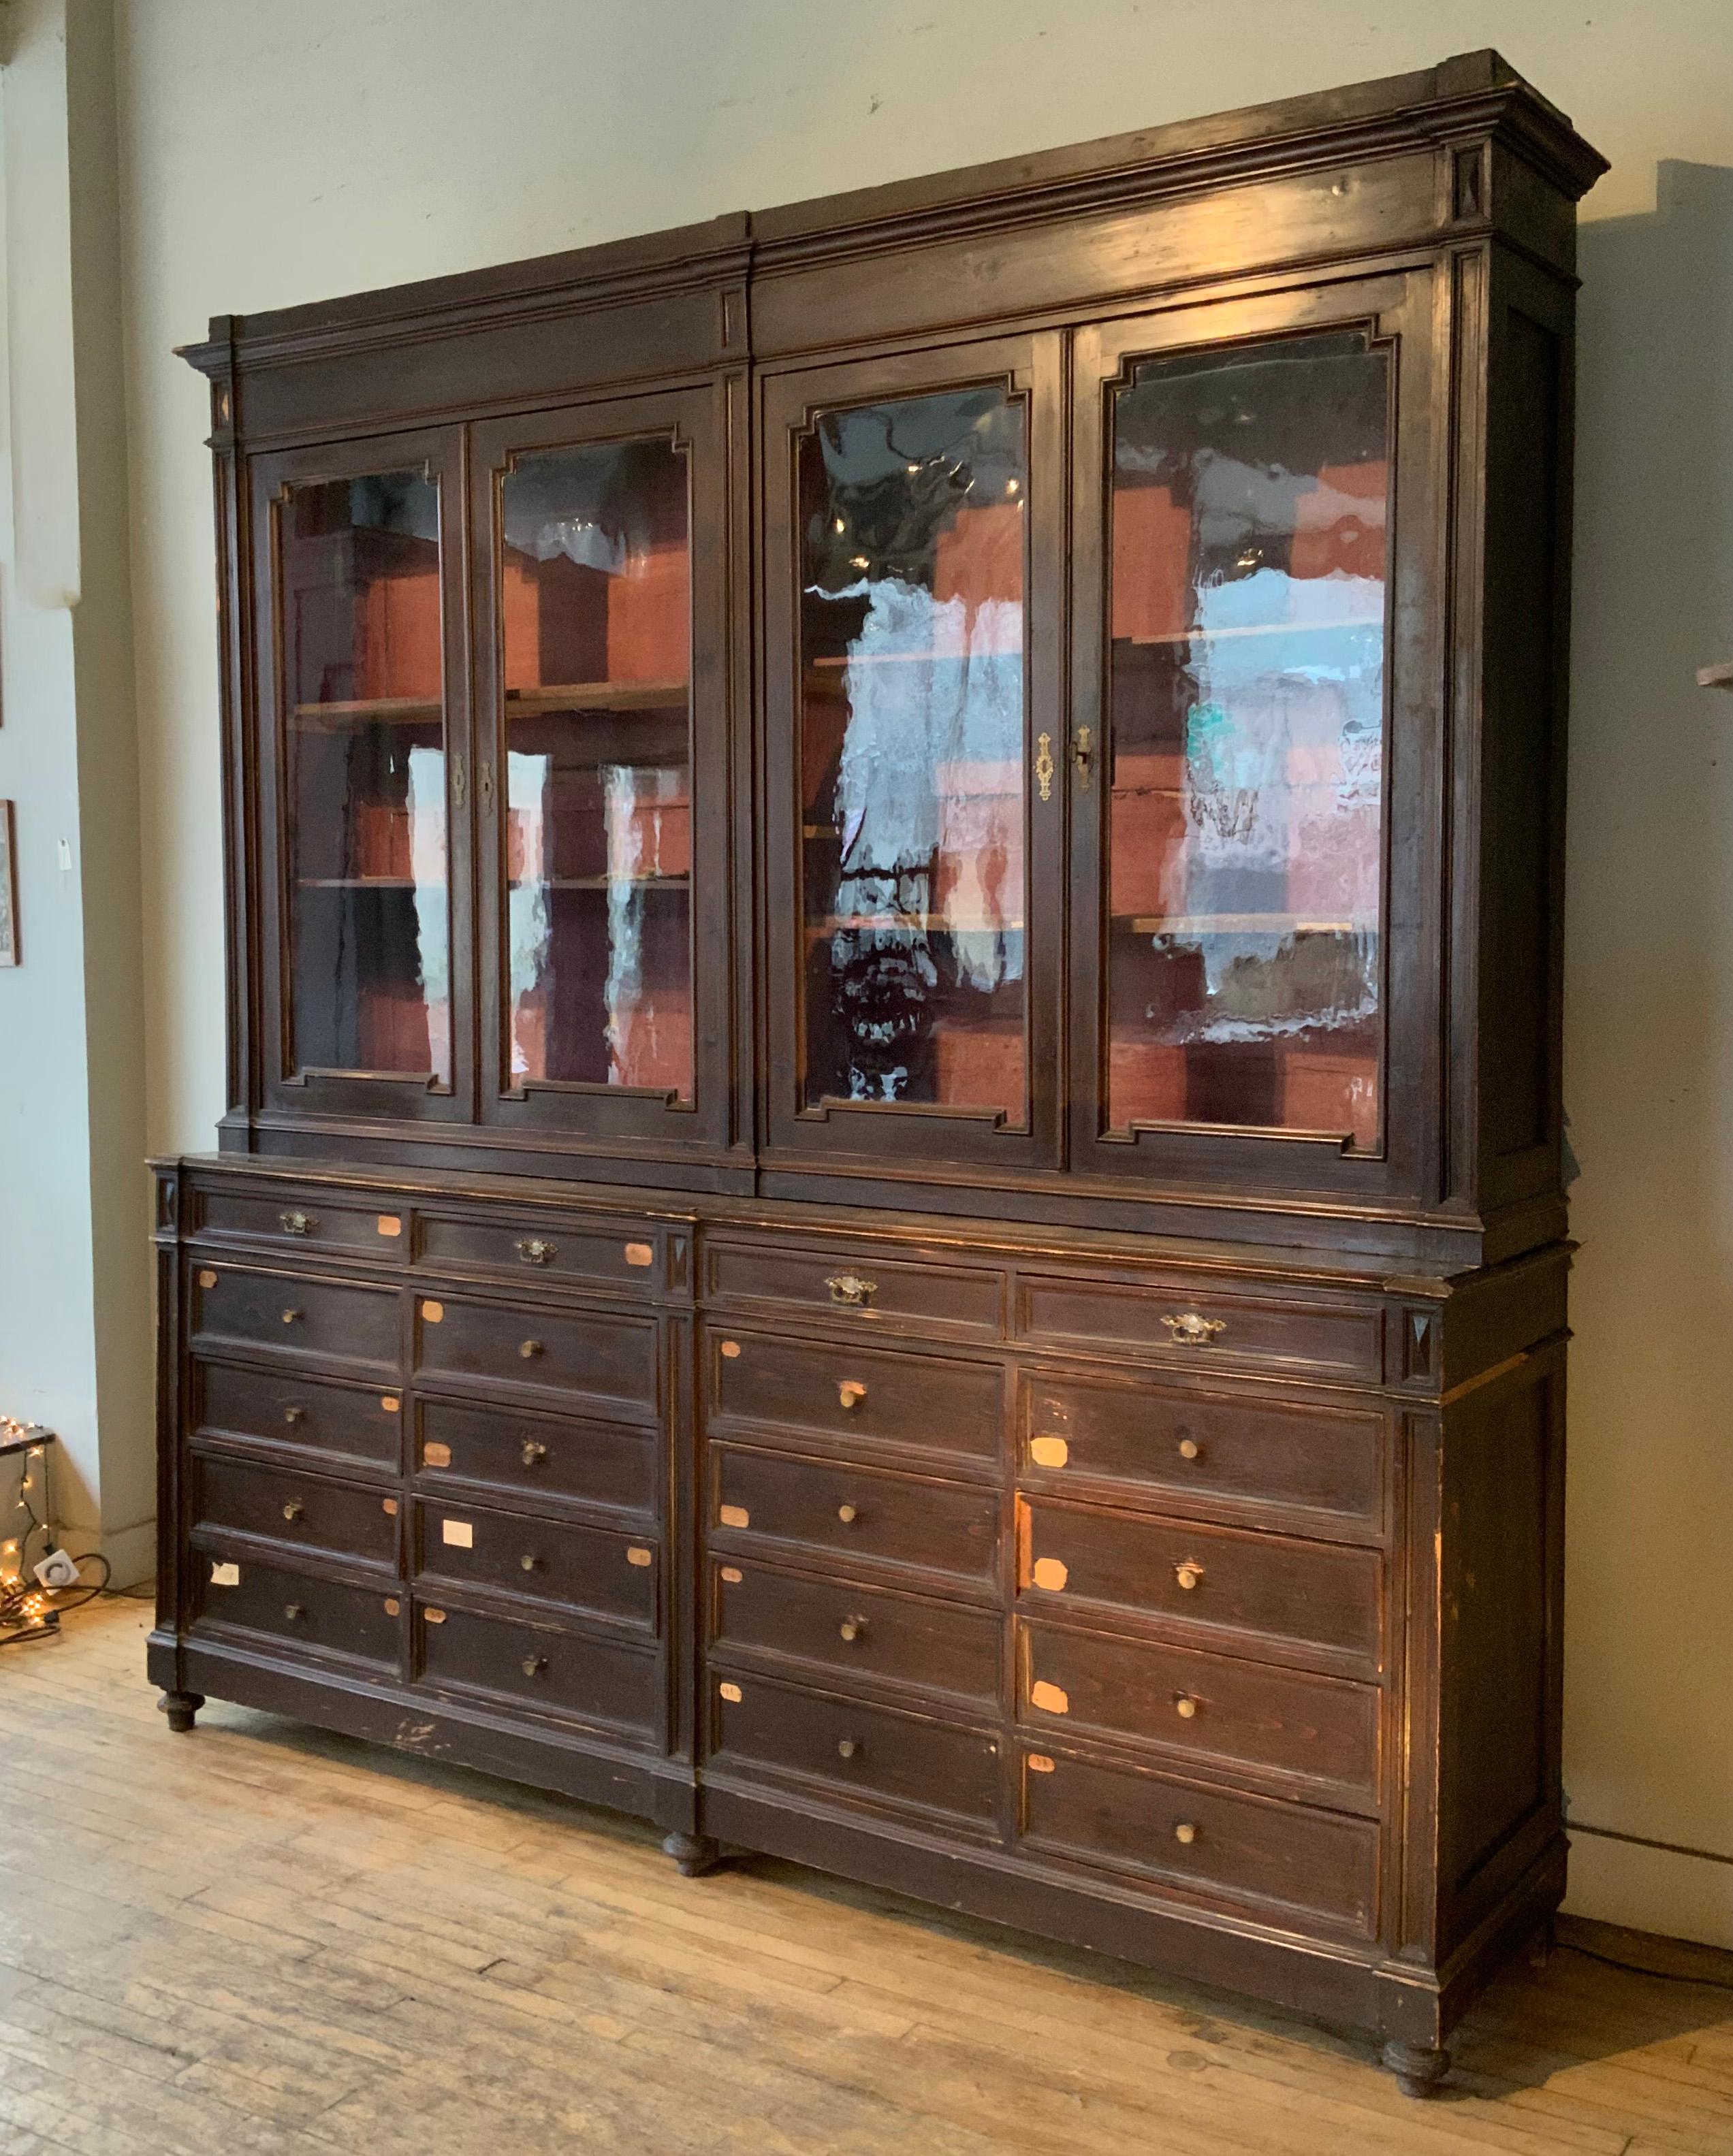 an incredible mid-19th century large Italian mercantile cabinet, with a base of four banks of 20 deep drawers, and an upper cabinet with shelves, and its original antique glass doors along with the original keys. wonderful scale and details. large